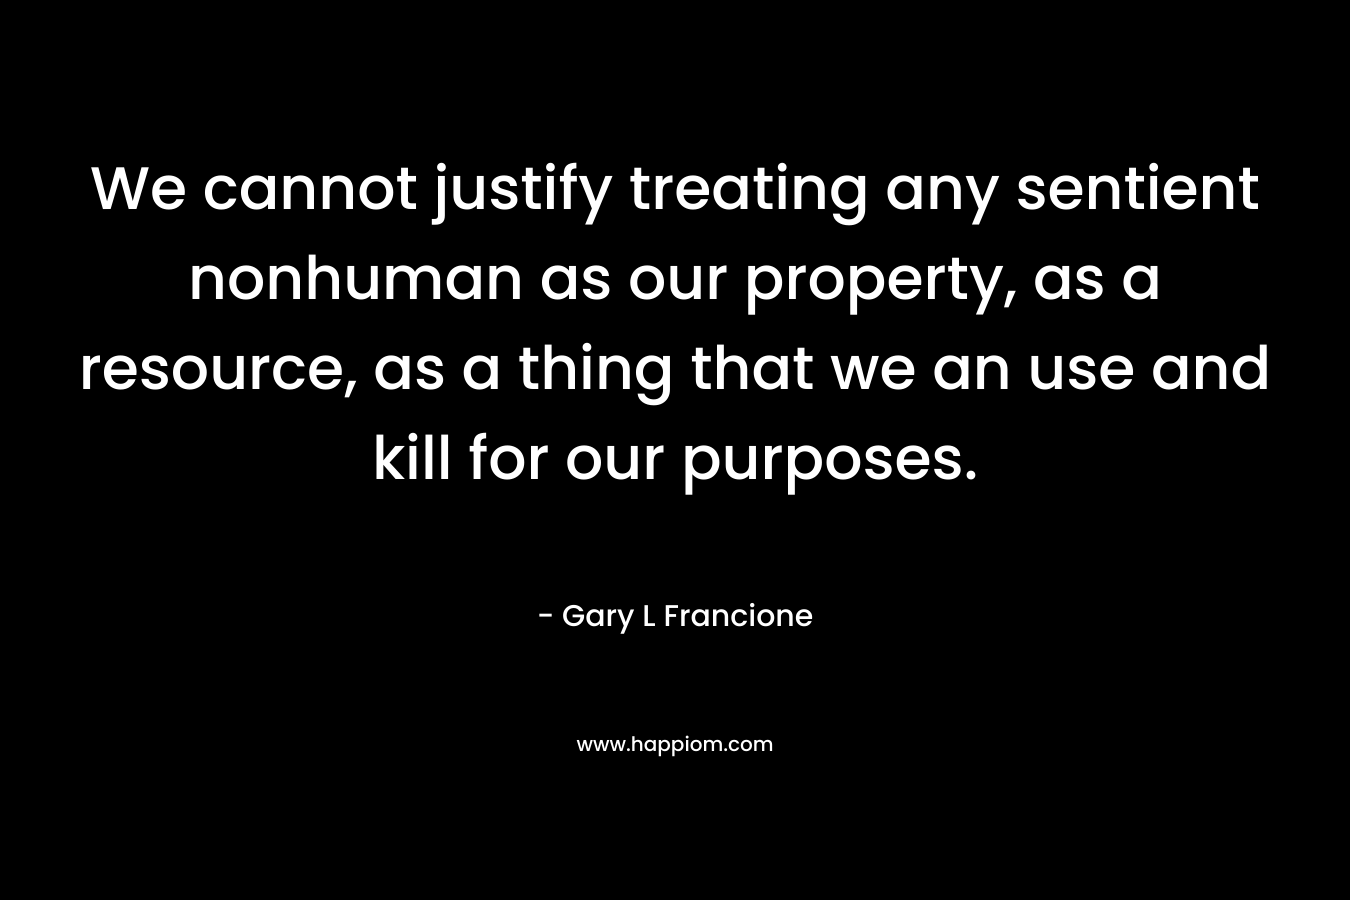 We cannot justify treating any sentient nonhuman as our property, as a resource, as a thing that we an use and kill for our purposes. – Gary L Francione